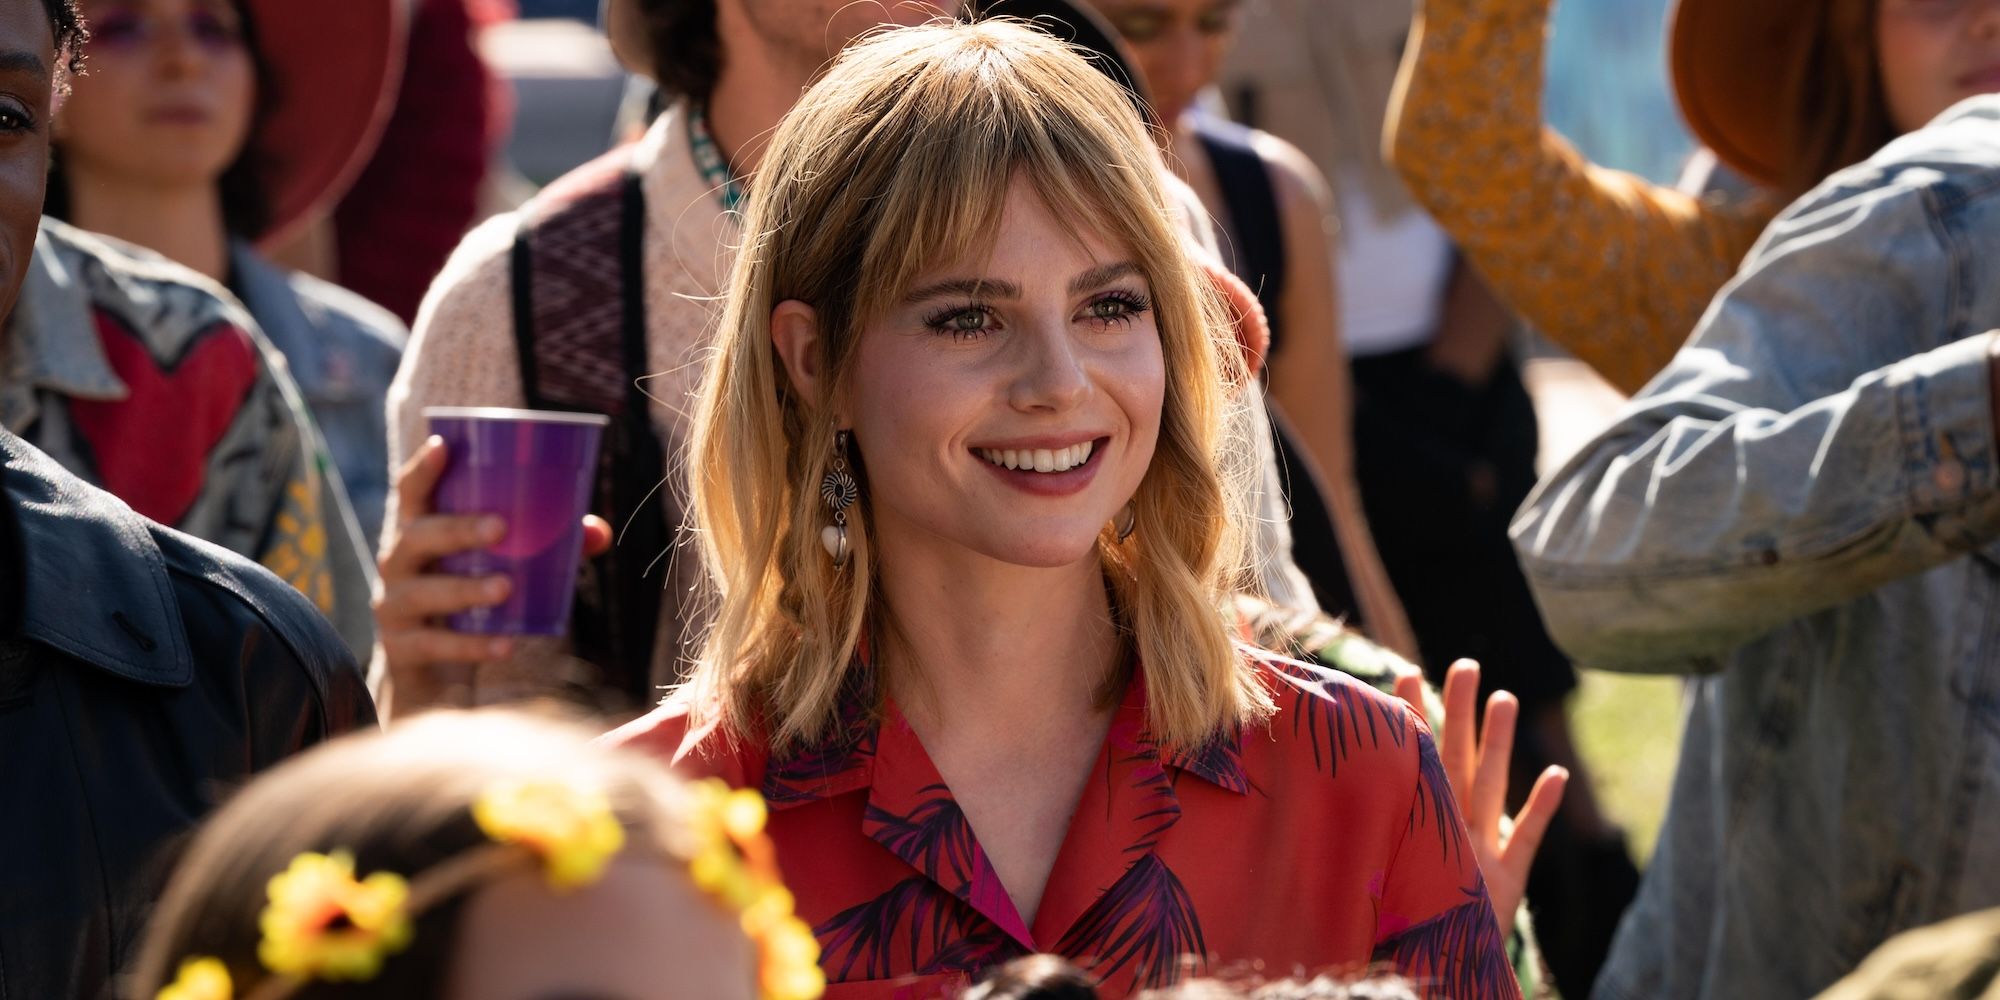 Lucy Boynton smiles while in a crowd in The Greatest Hits movie still